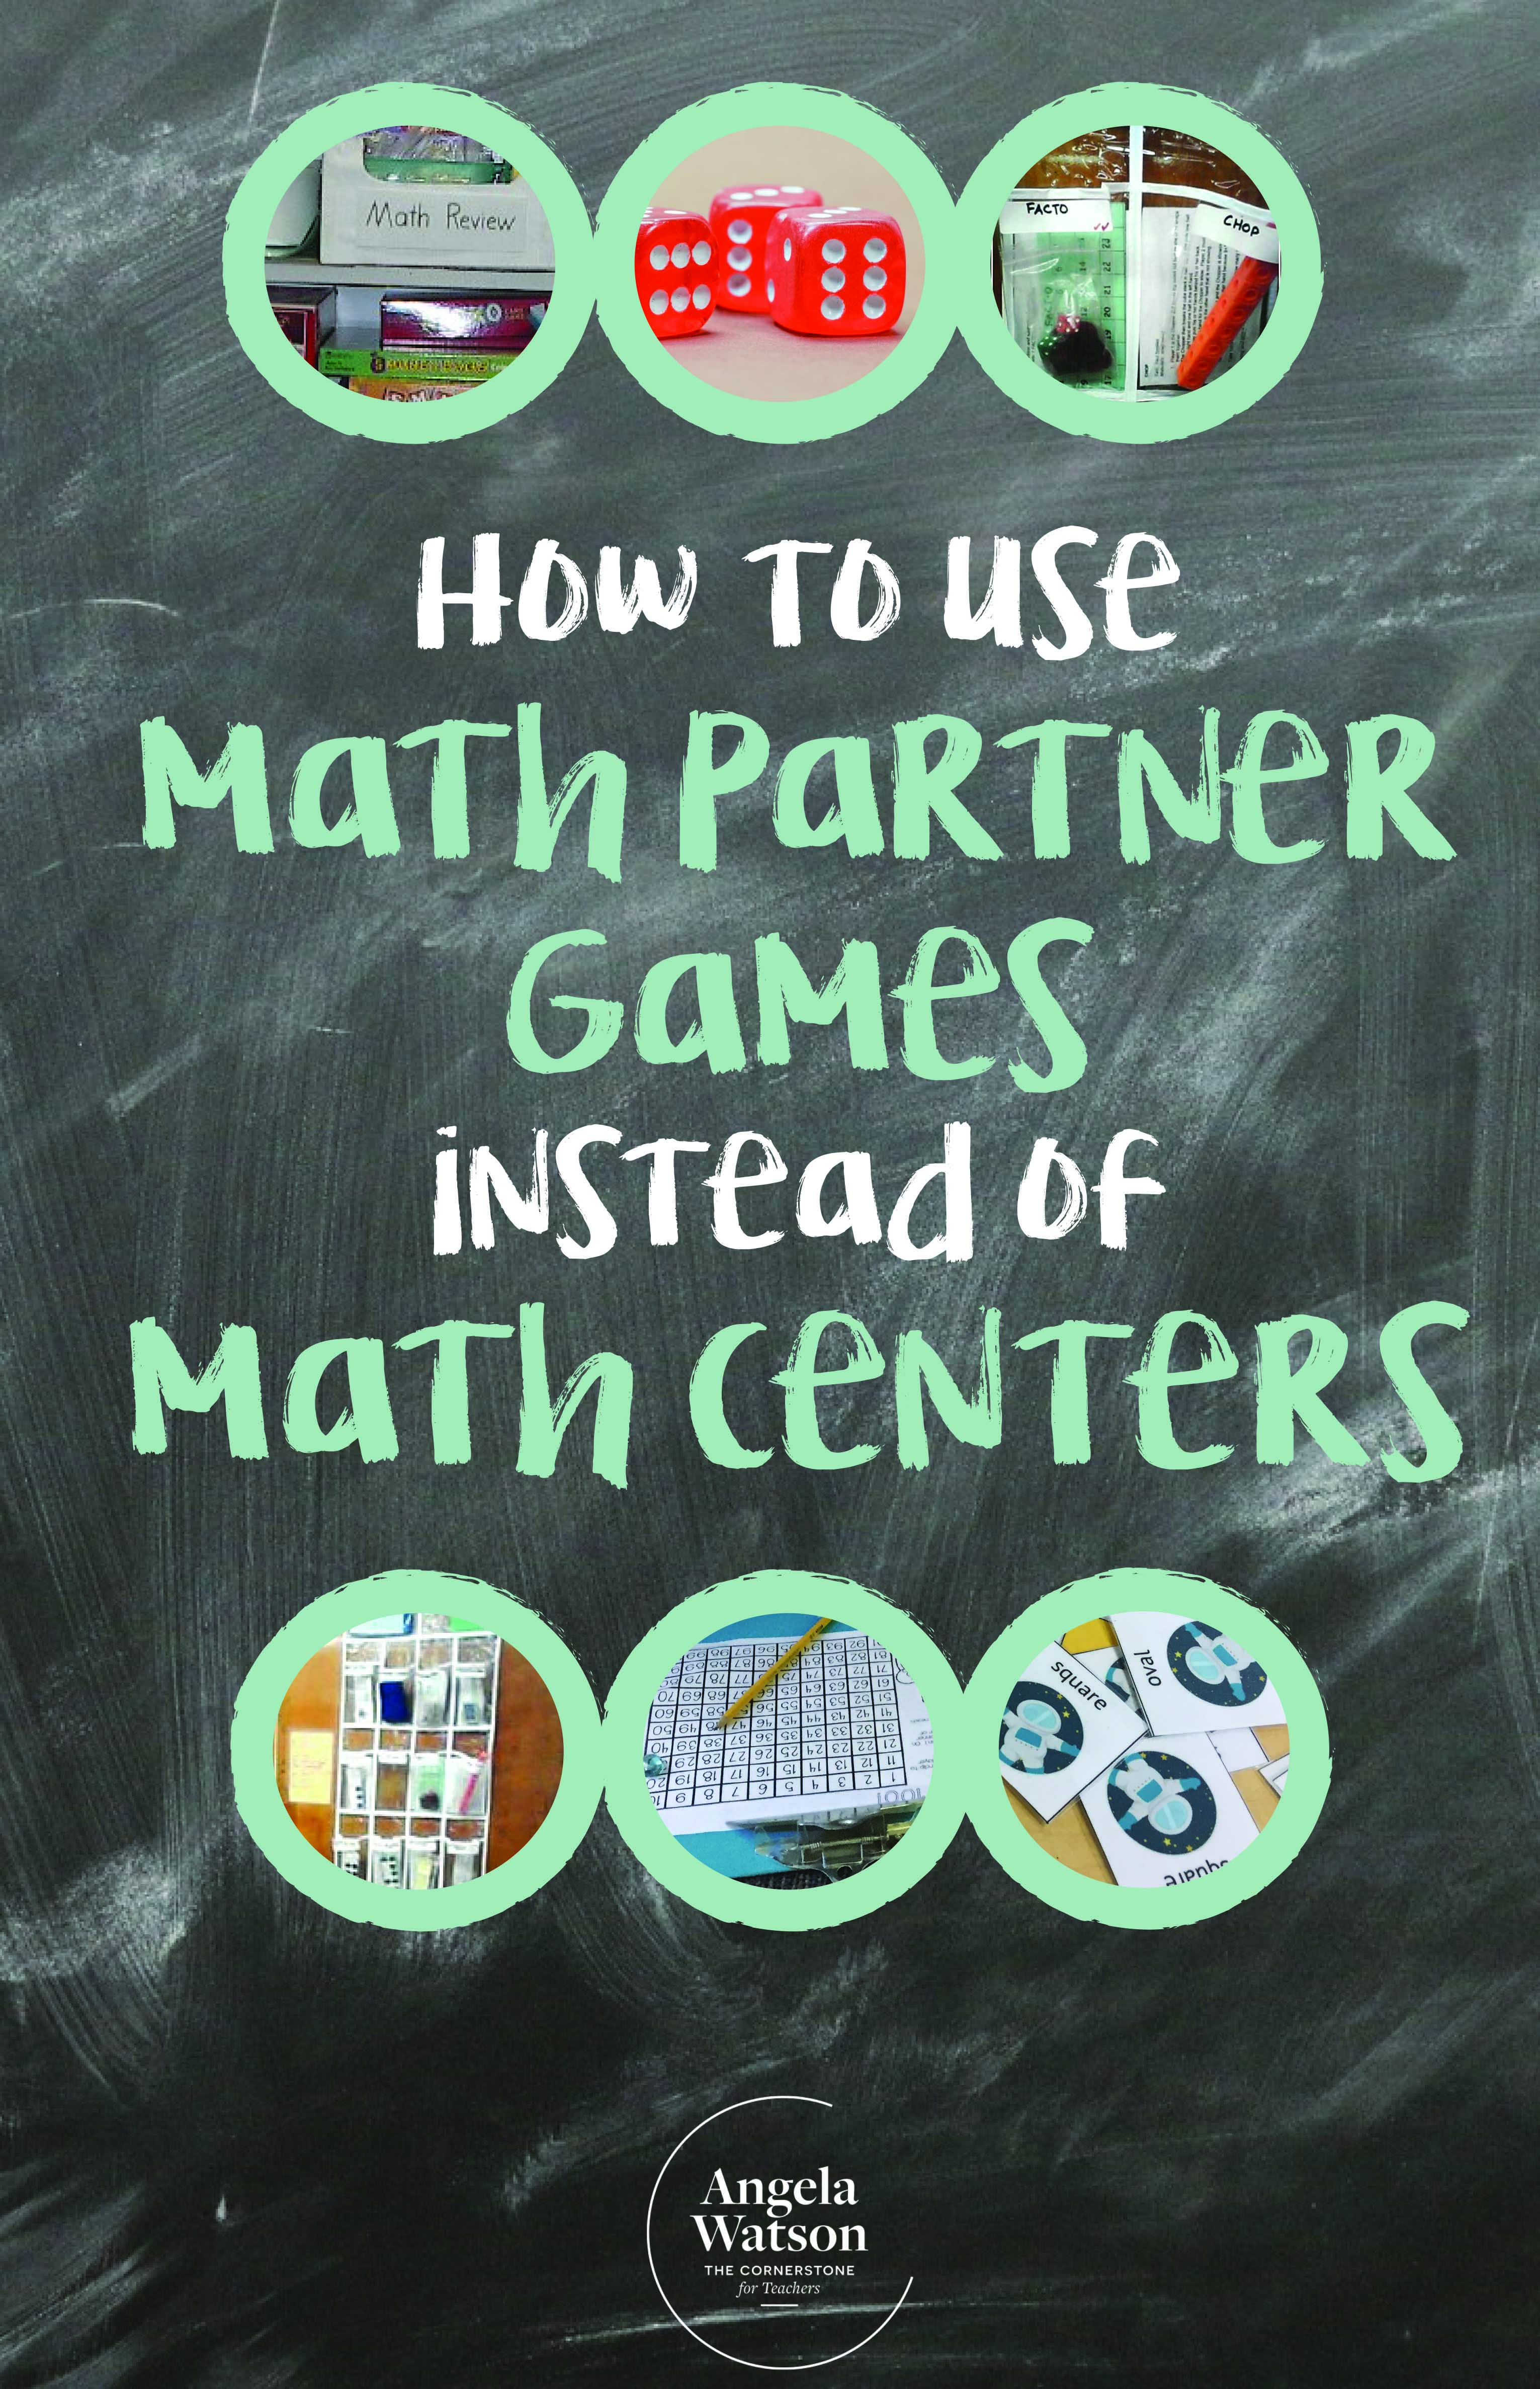 truth-for-teachers-how-to-use-math-partner-games-instead-of-math-centers